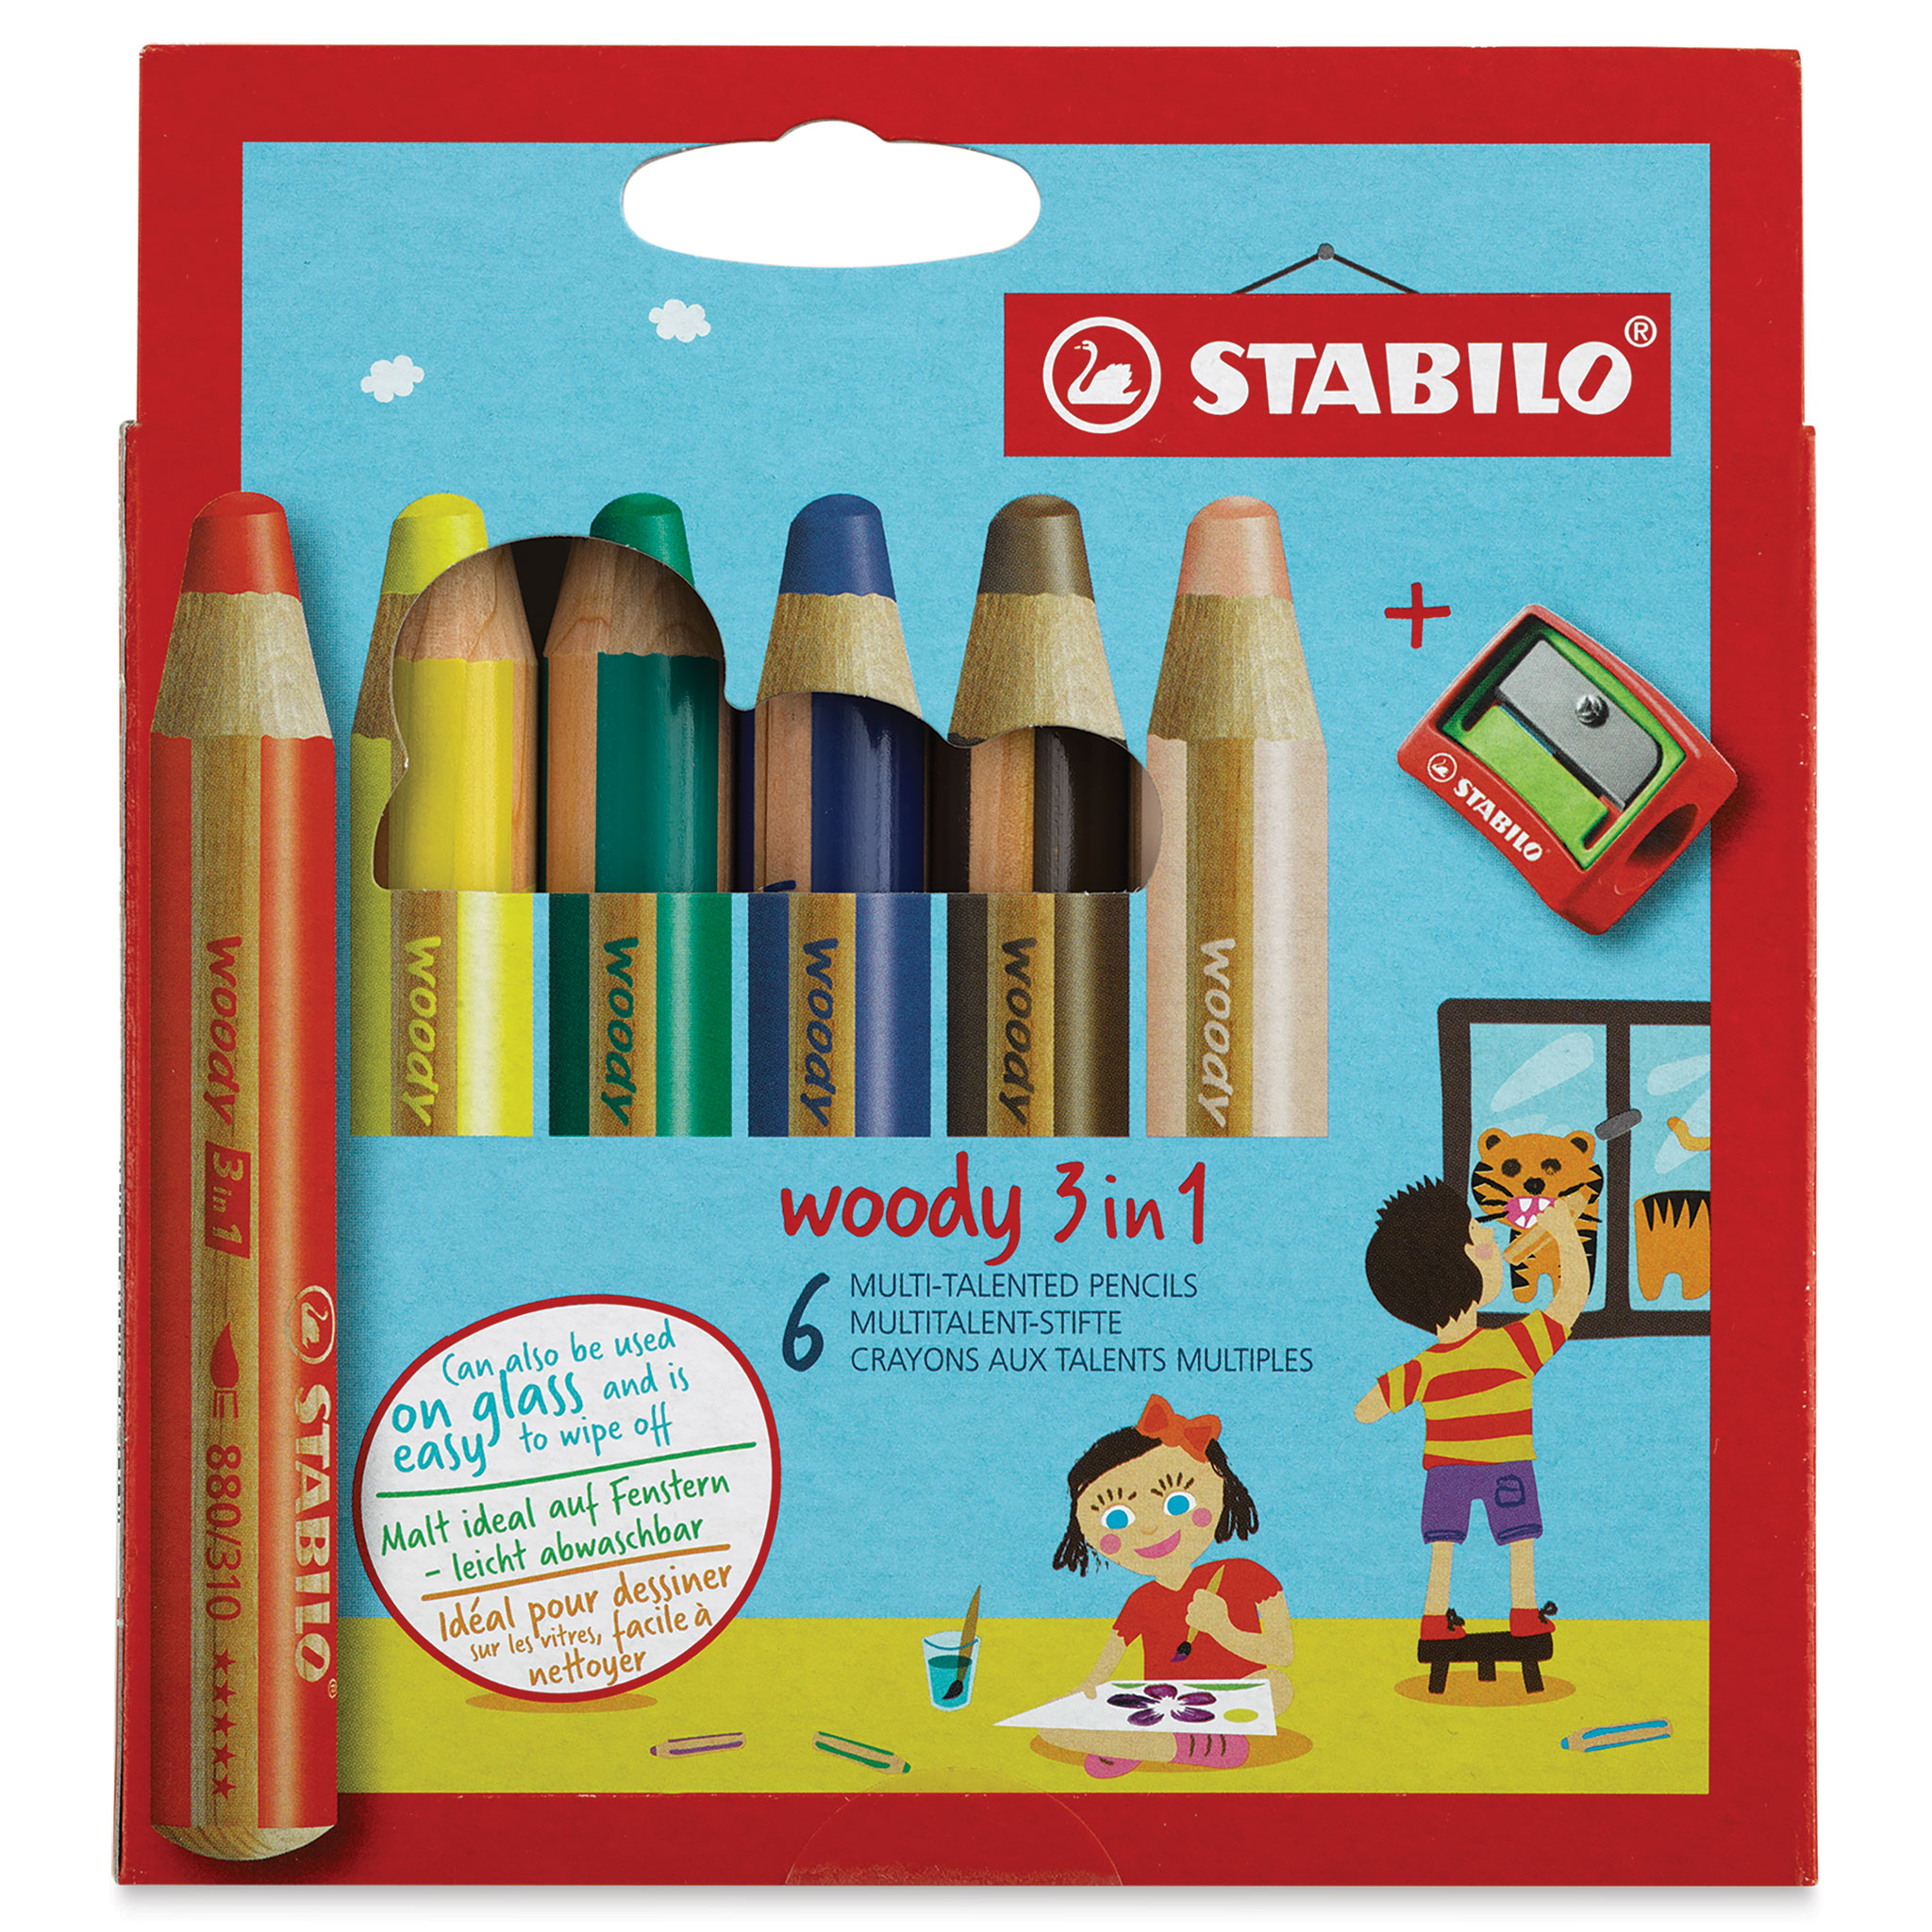 Stabilio Woody 3in1 Wax Crayons — Automatic Cutter Supply LLC